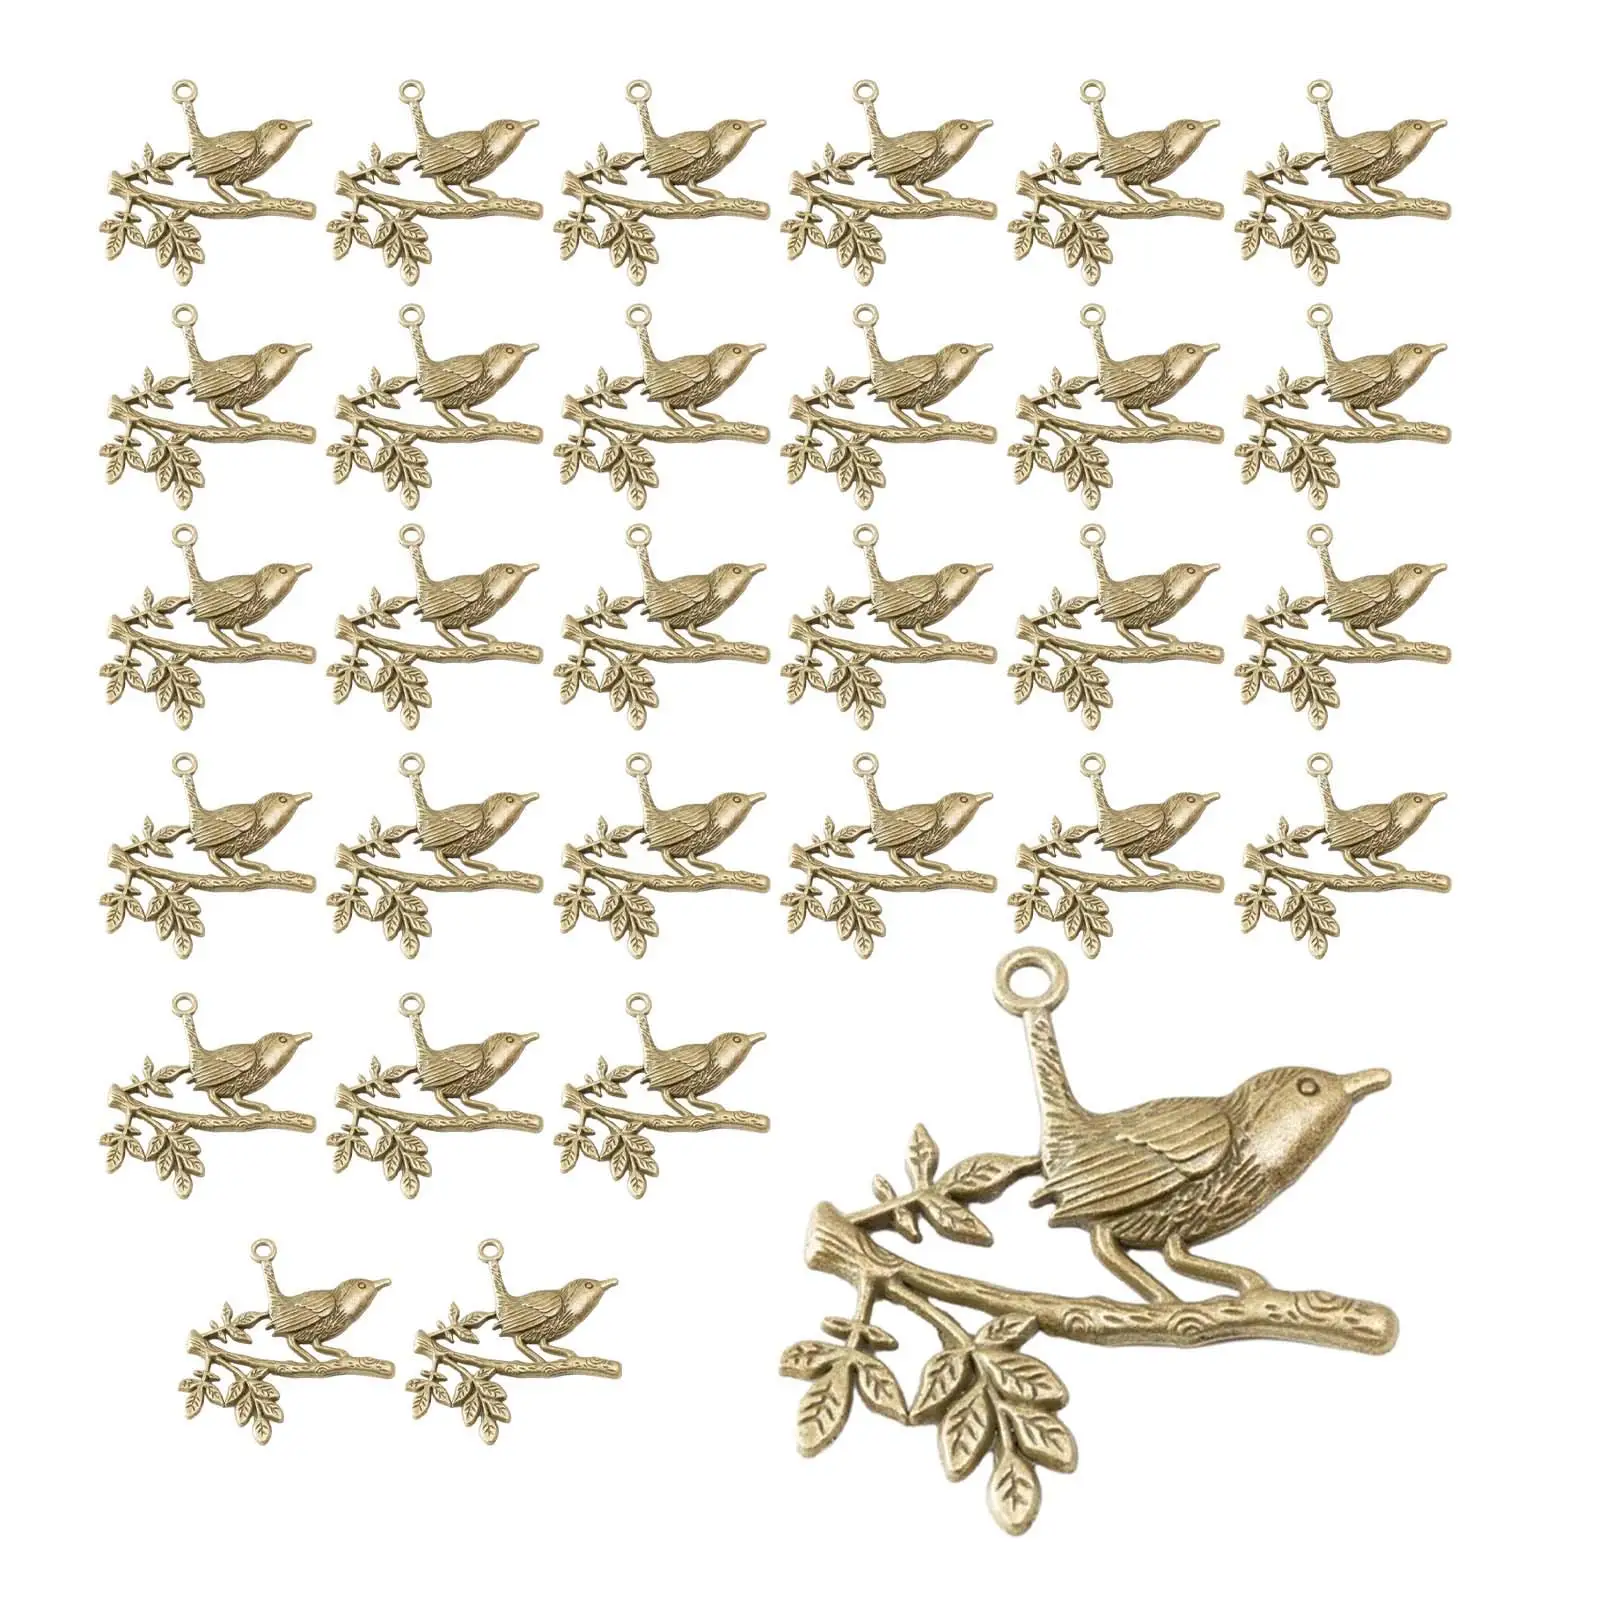 30 Pieces Bird Charms Vintage Metal Supplies Beads Pendants for Handmade Crafts Necklace Bag Decoration Zippers Earrings